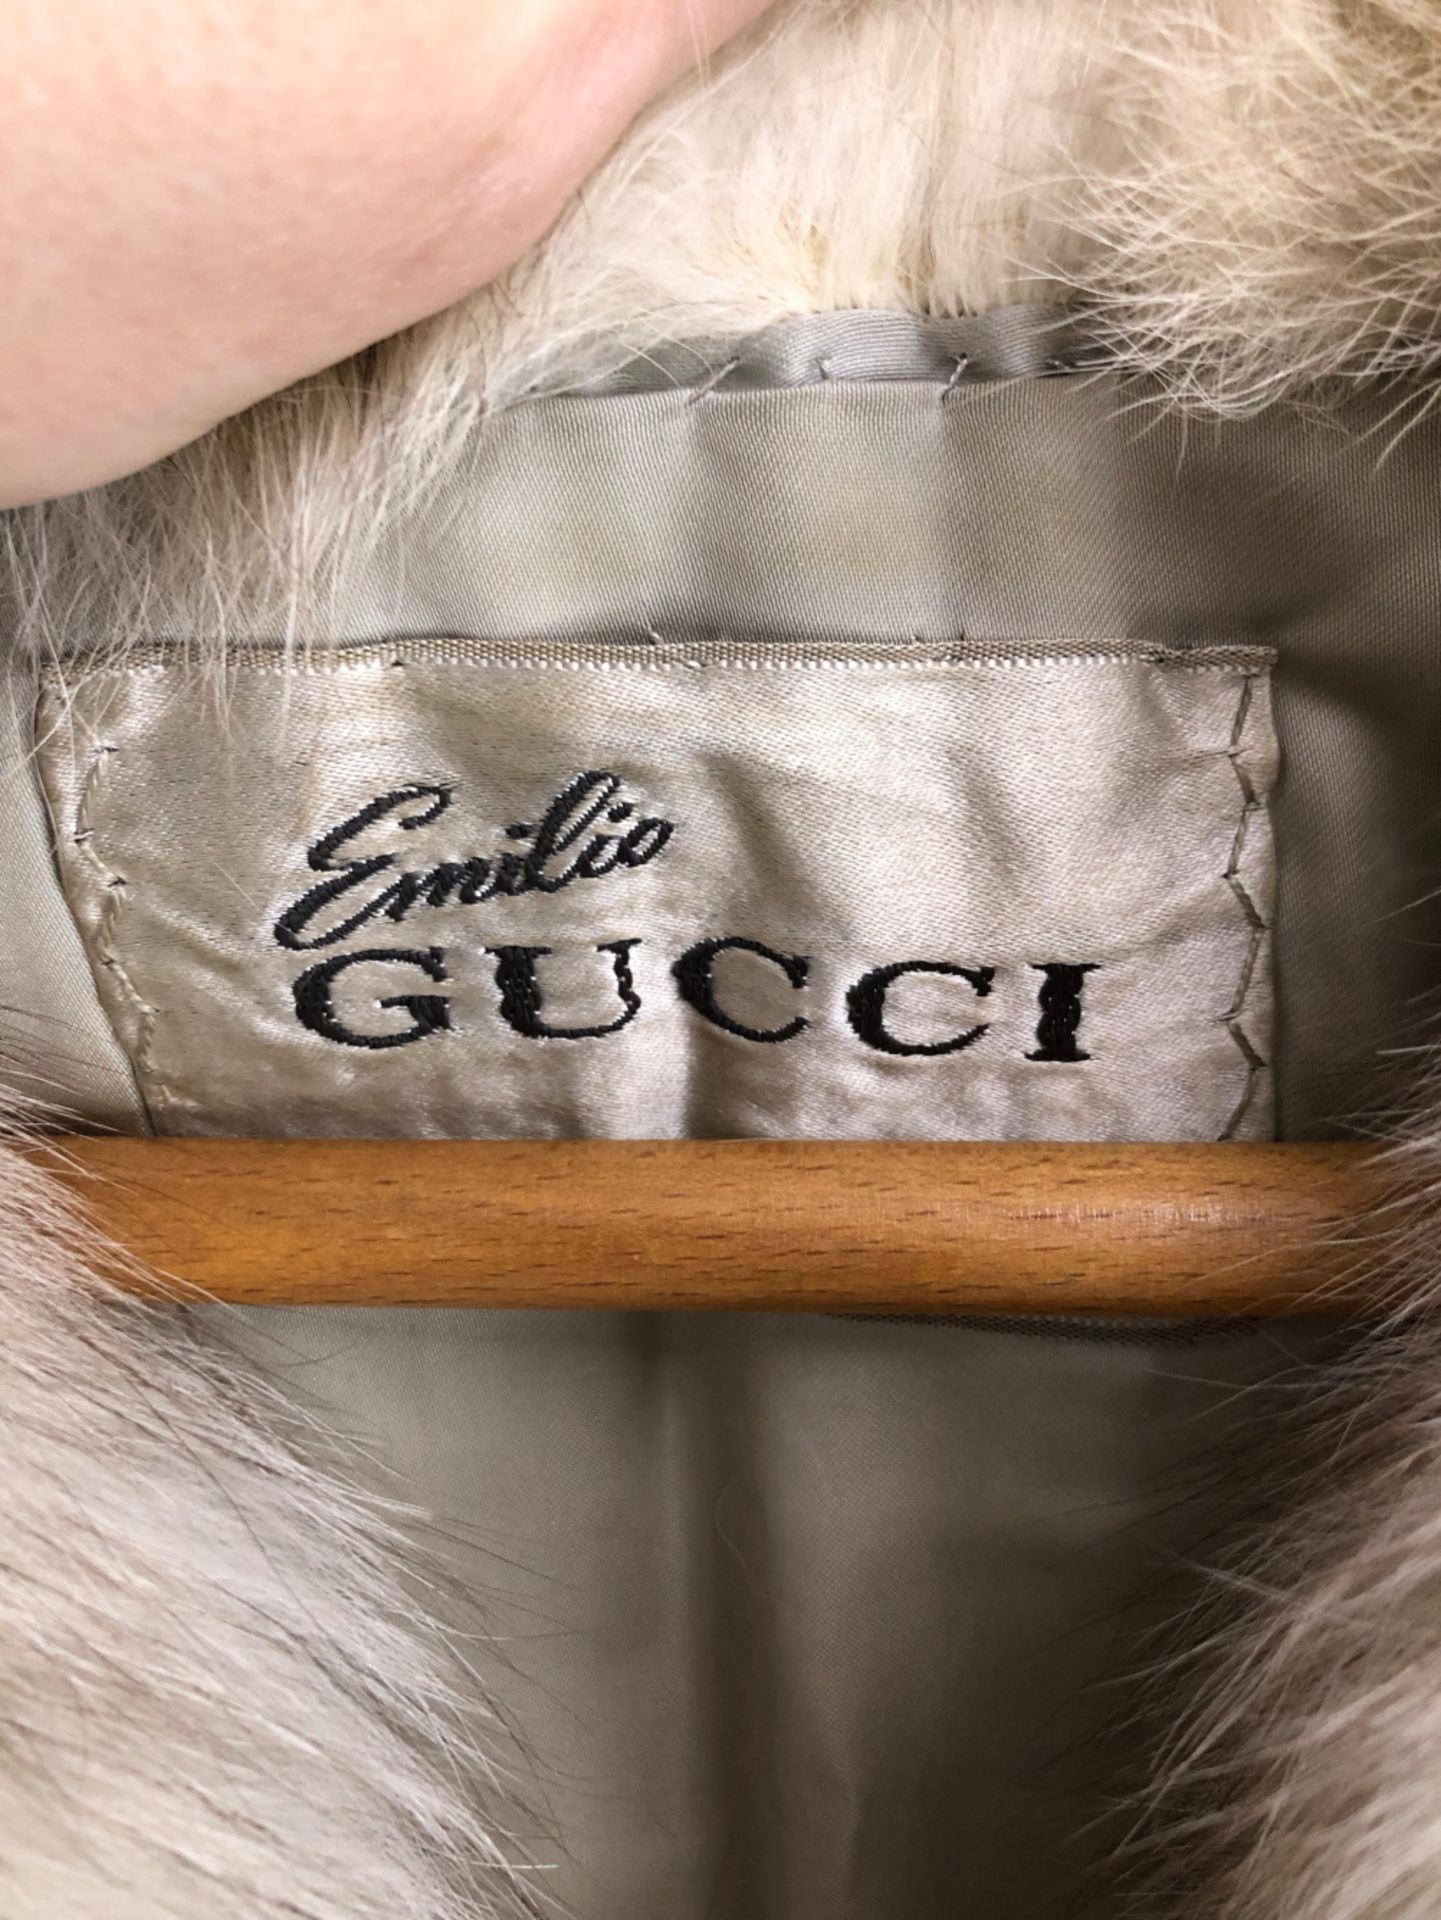 FUR COAT: EMILIO GUCCI, WHITE WITH HORIZONTAL GREY TINGED BANDS, WITH ZIPPED BAND TO ADJUST THE - Image 4 of 17